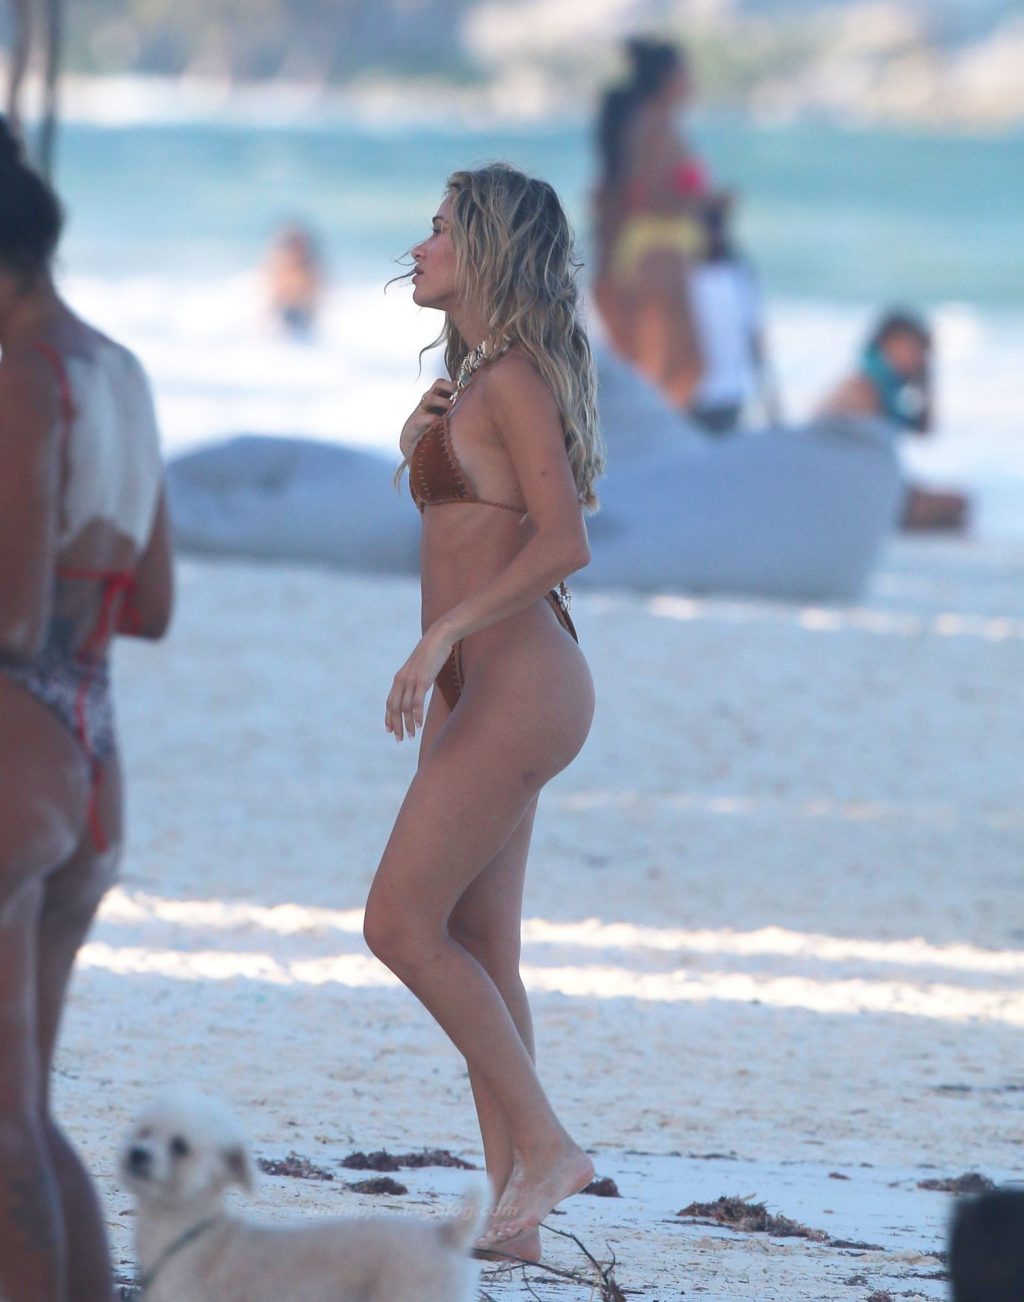 Cindy Prado Looks Amazing As She Does a Photoshoot on The Beach in Mexico (43 Photos)